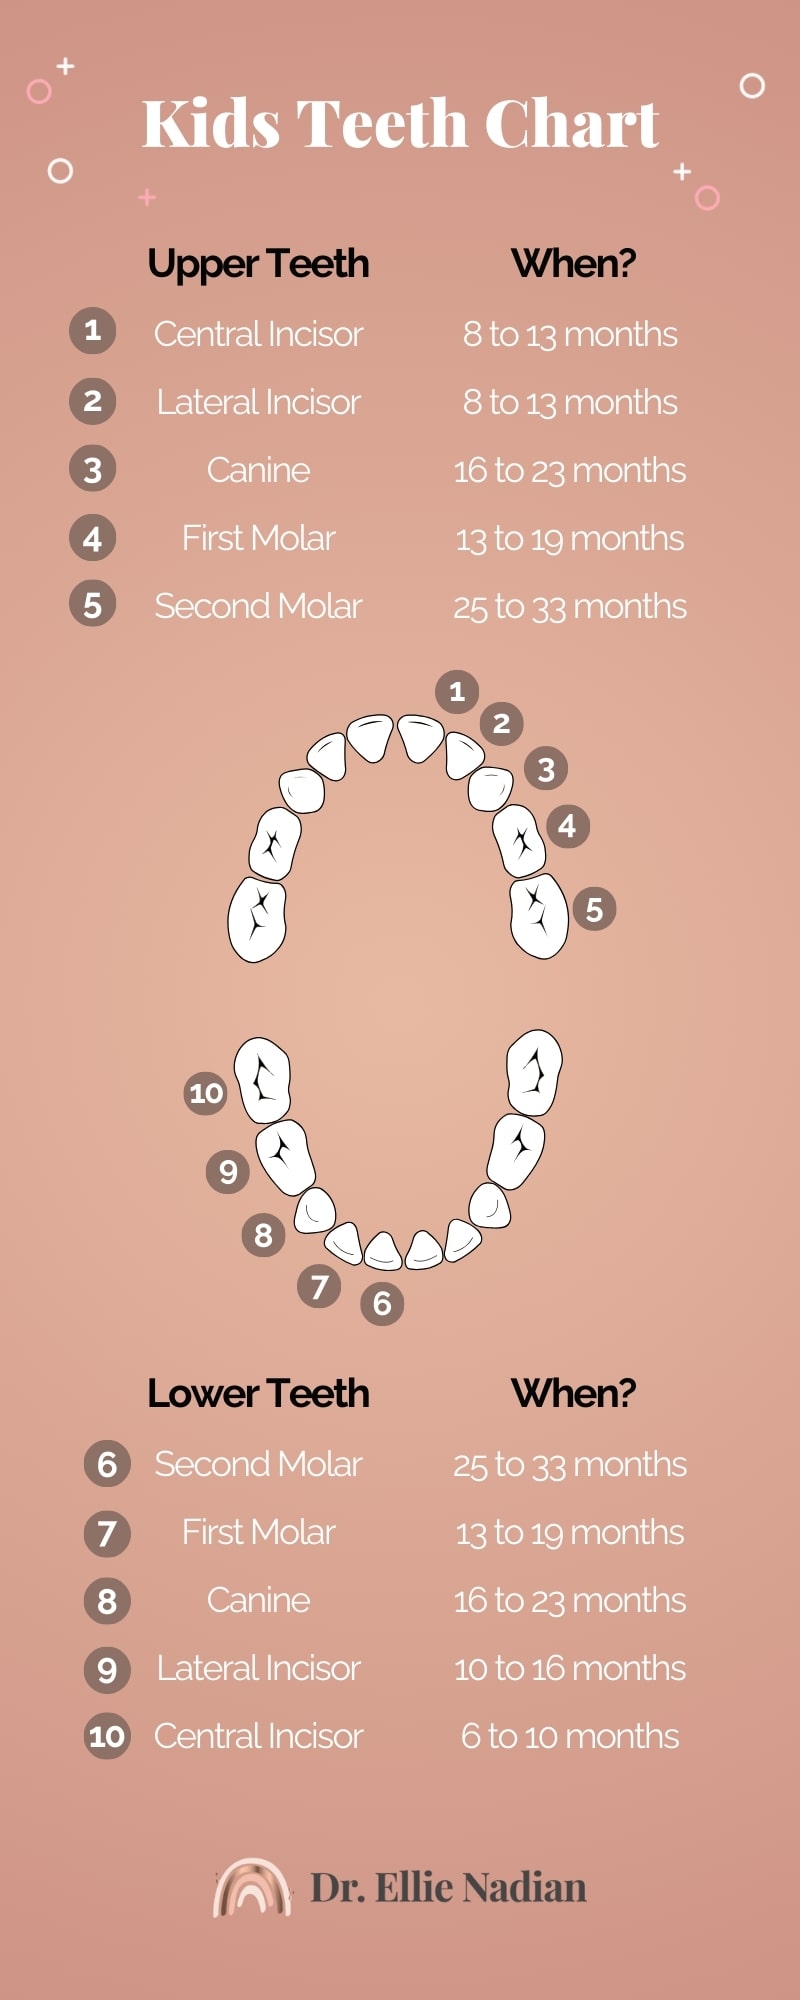 Childs Teeth Growth and Development Chart